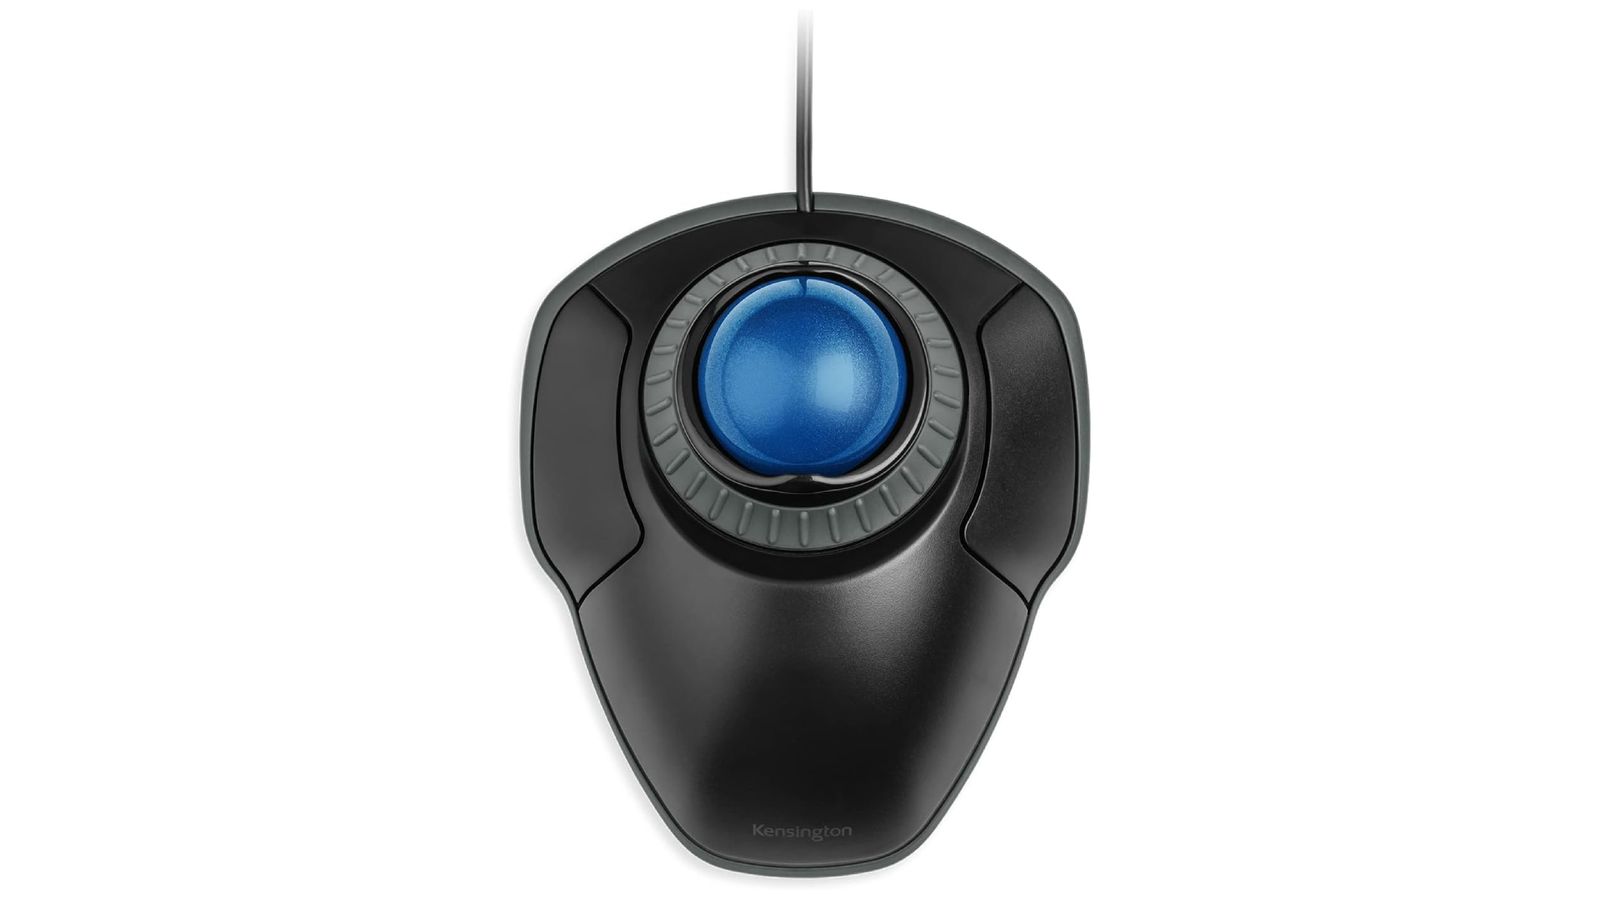 Kensington Orbit product image of a black, wired mouse featuring a blue trackball in the centre.